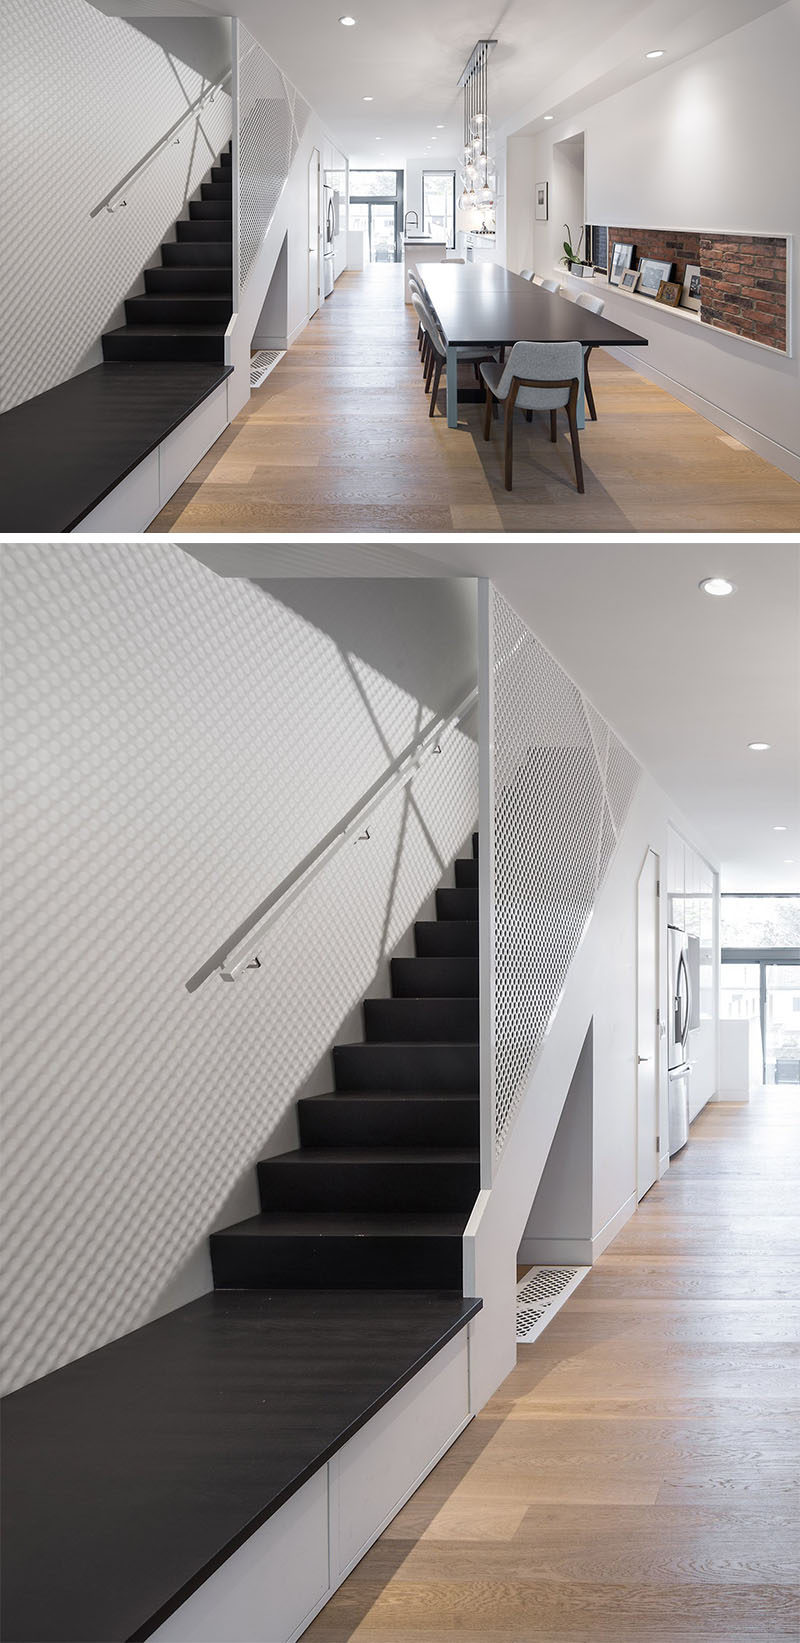 Design Idea For Stairs This Stair Landing Has Hidden Shoe